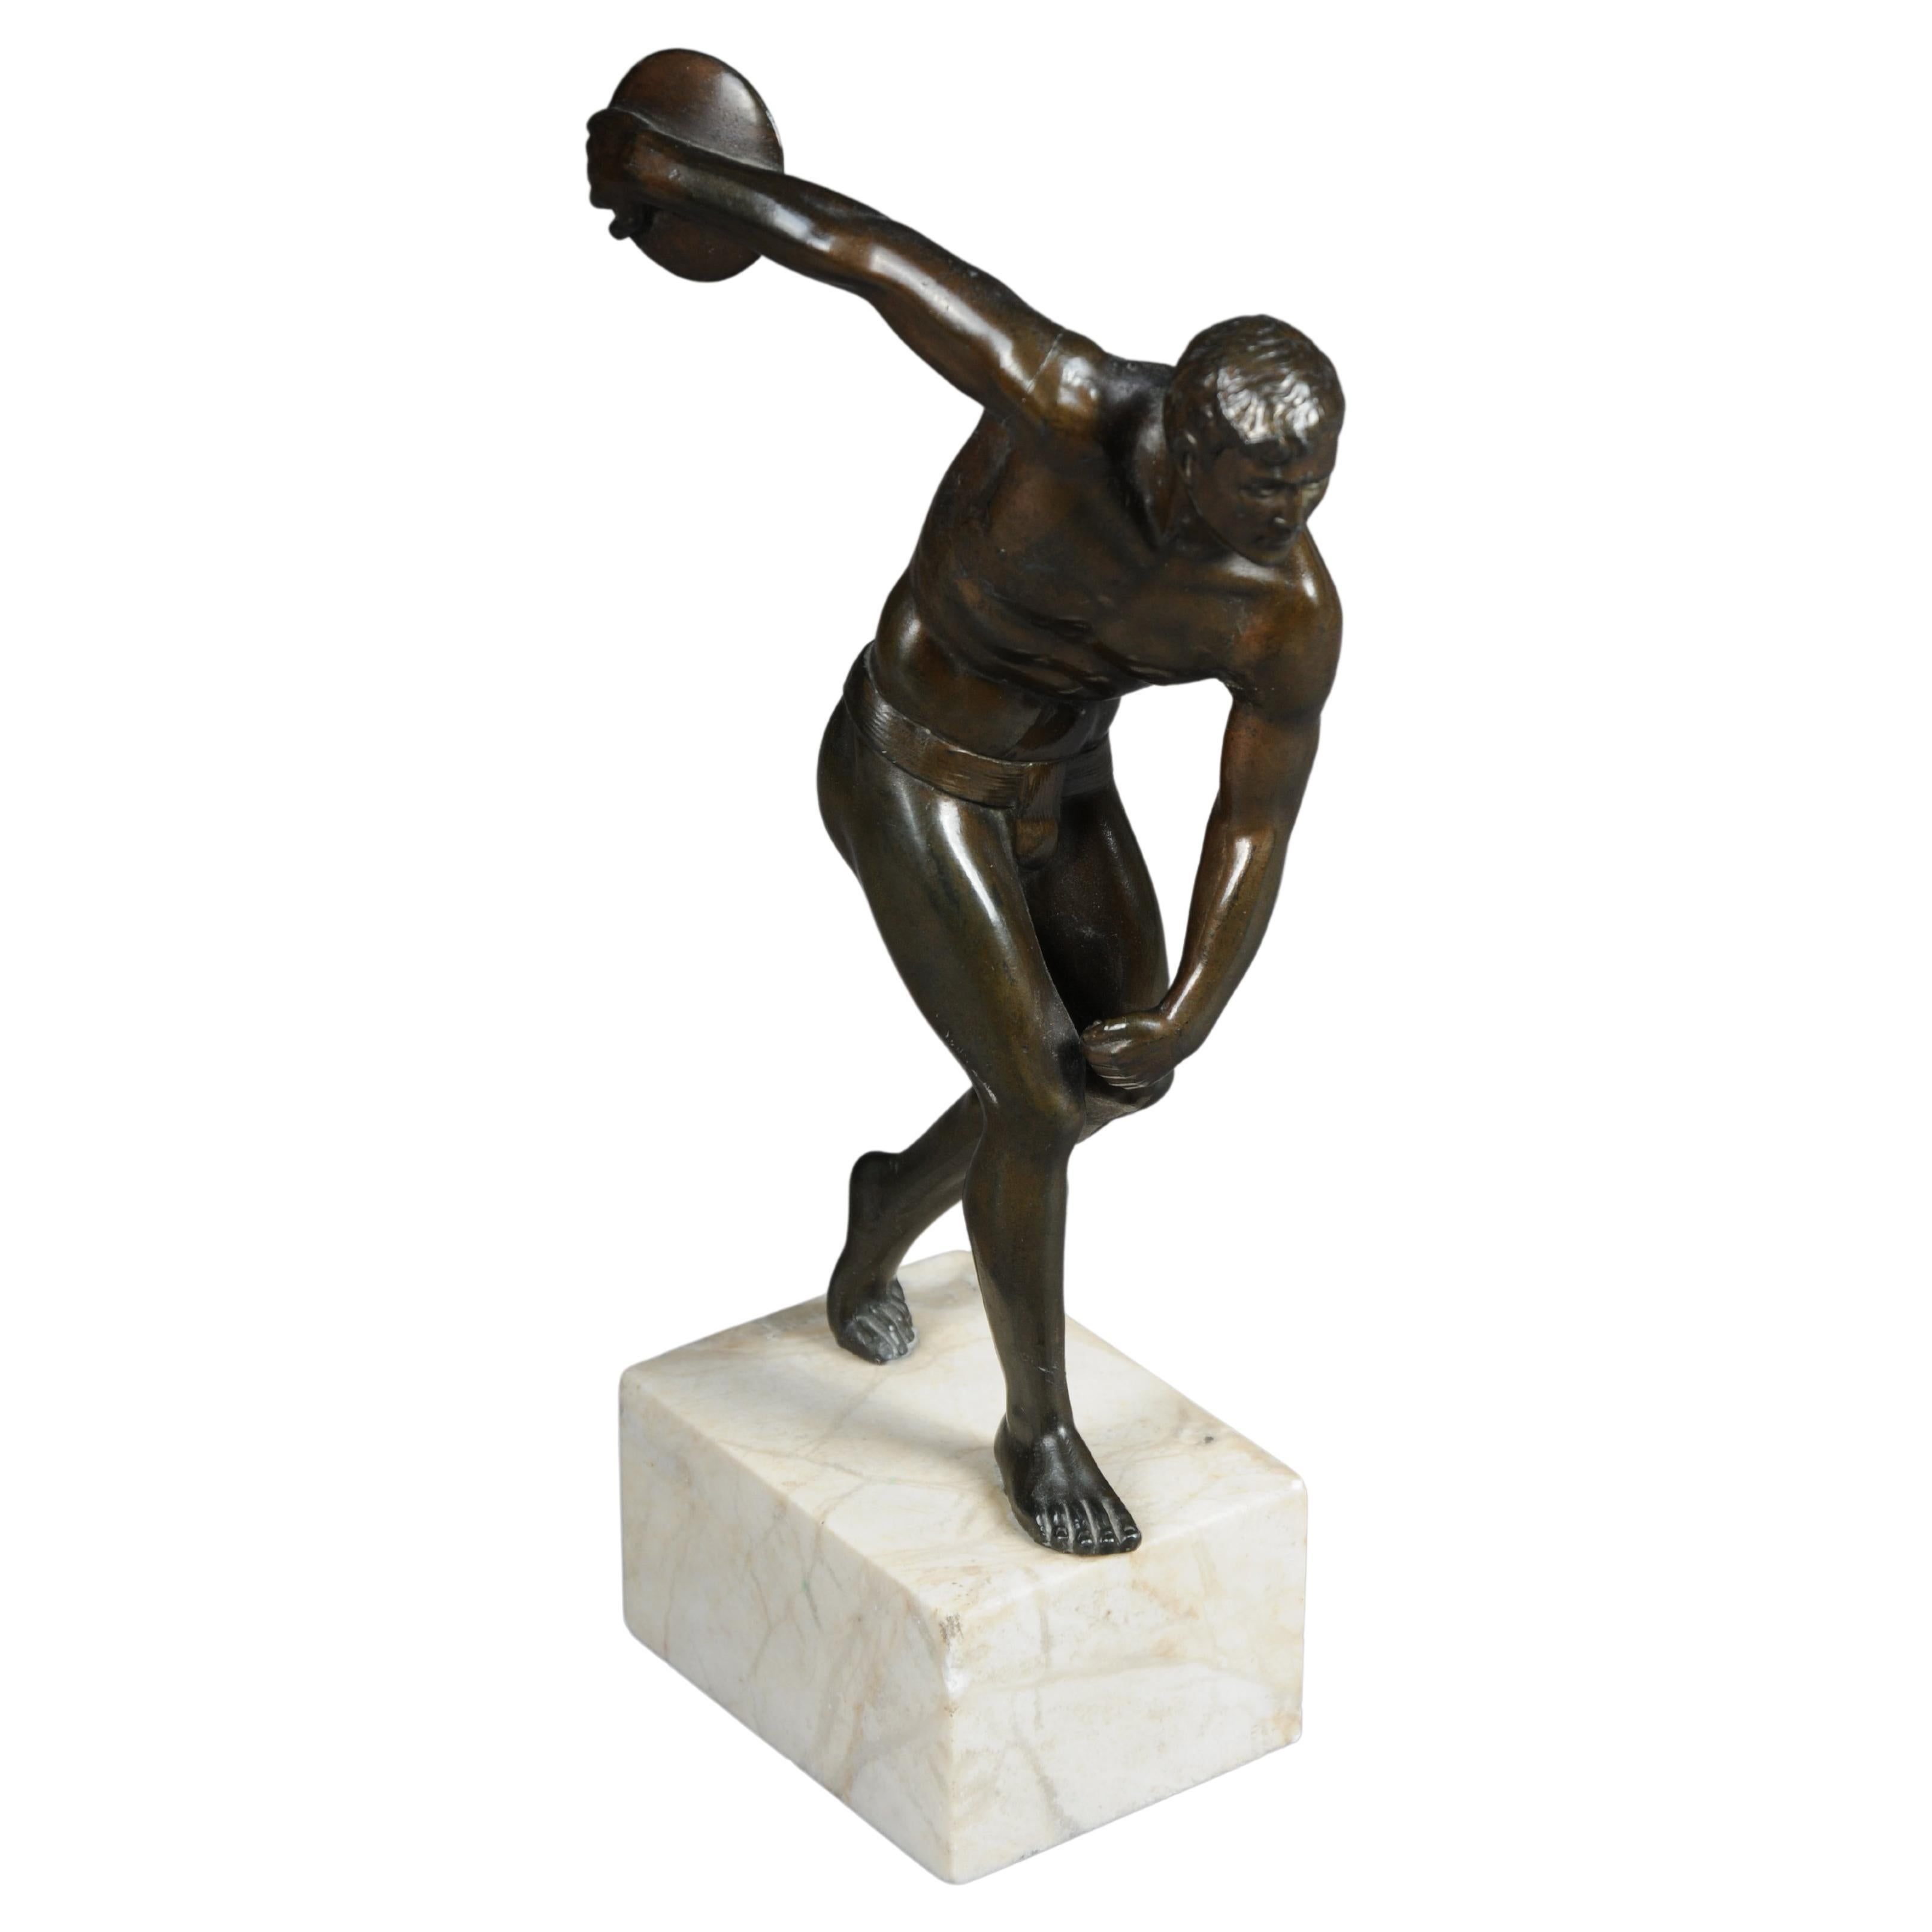 Beautiful Bronzed, Athletic Discus Thrower, Germany, 20th Century